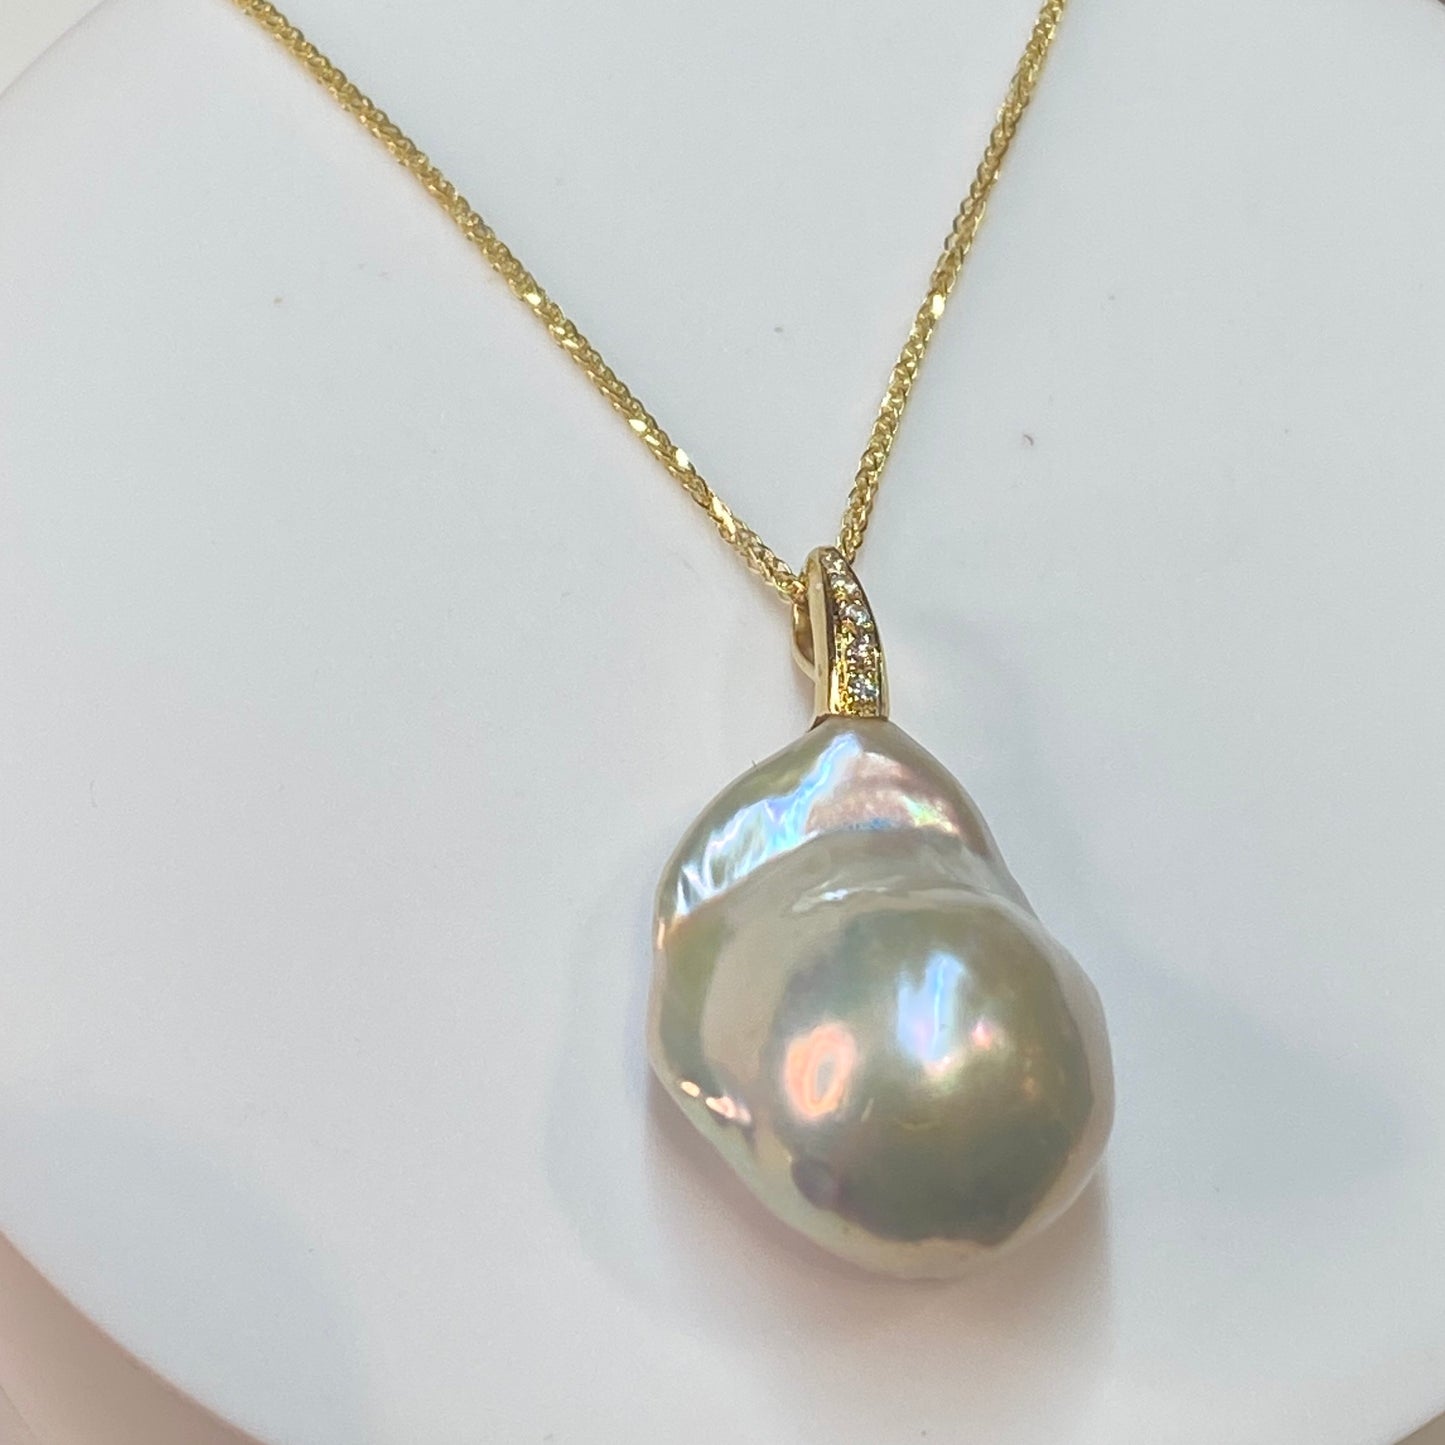 18ct Gold Alessia Baroque Cultured Pearl Pendant & Chain - John Ross Jewellers